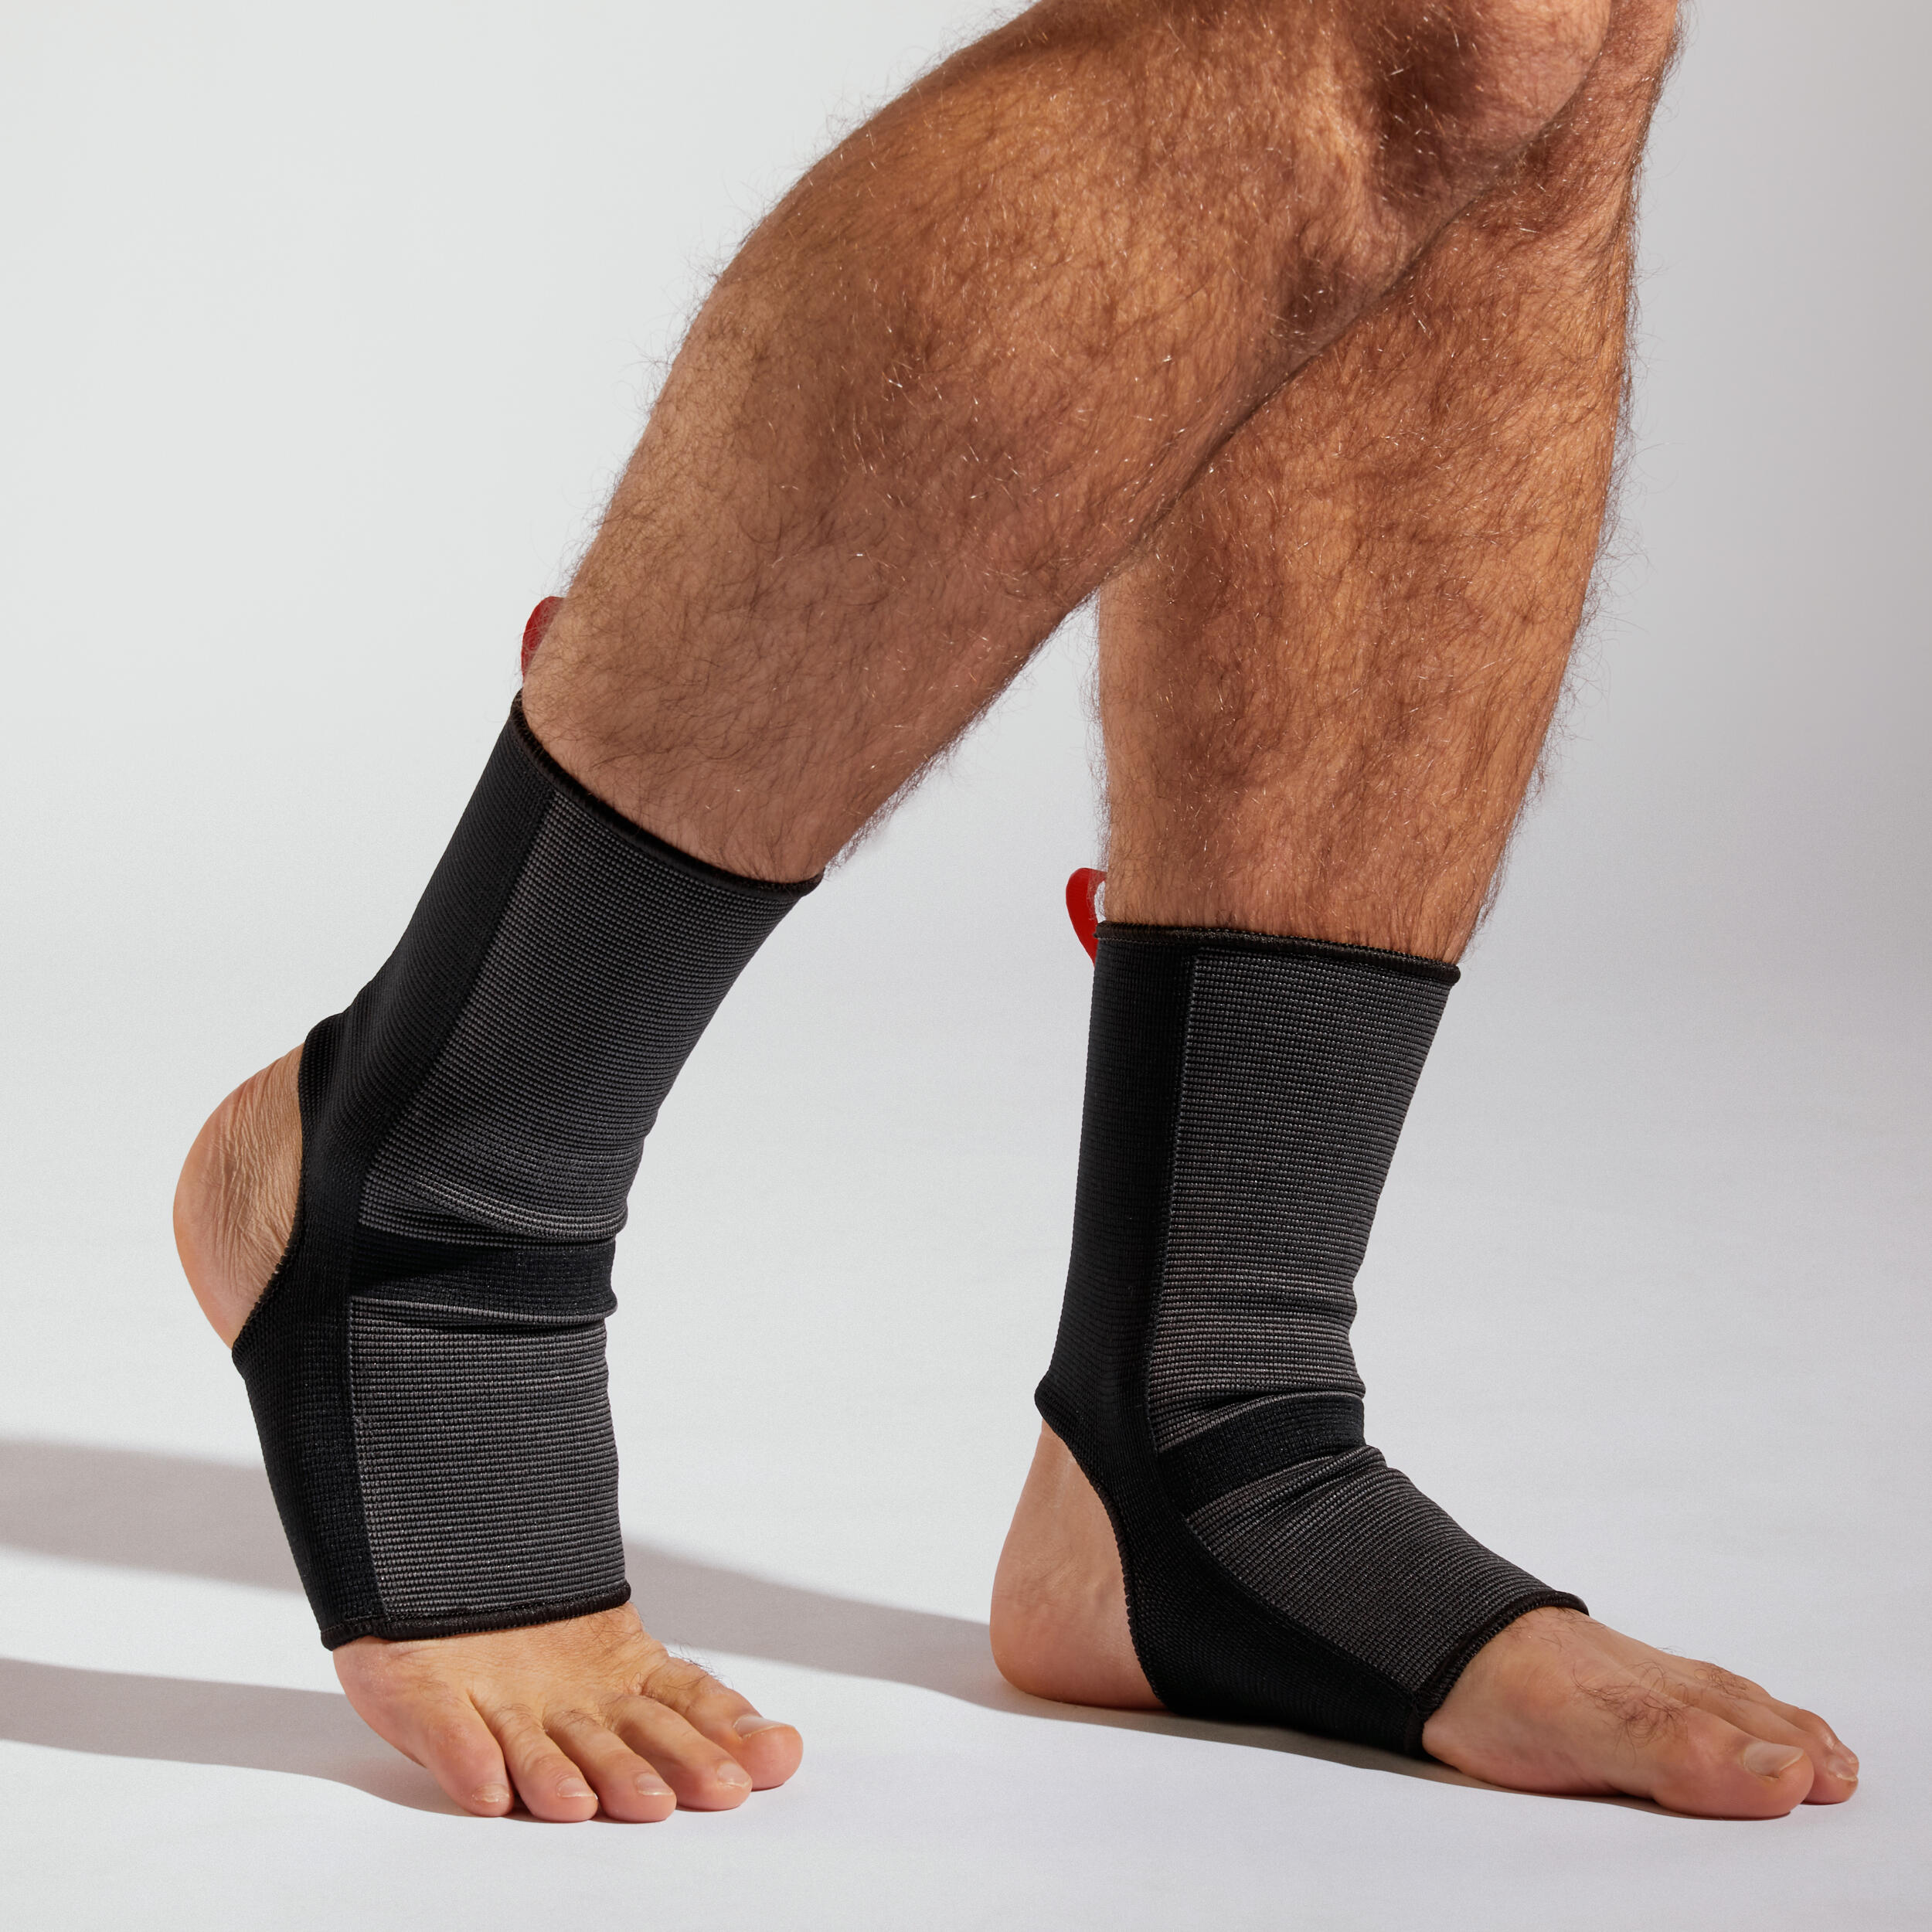 Adult Muay Thai Ankle Support - Black/Red 2/5